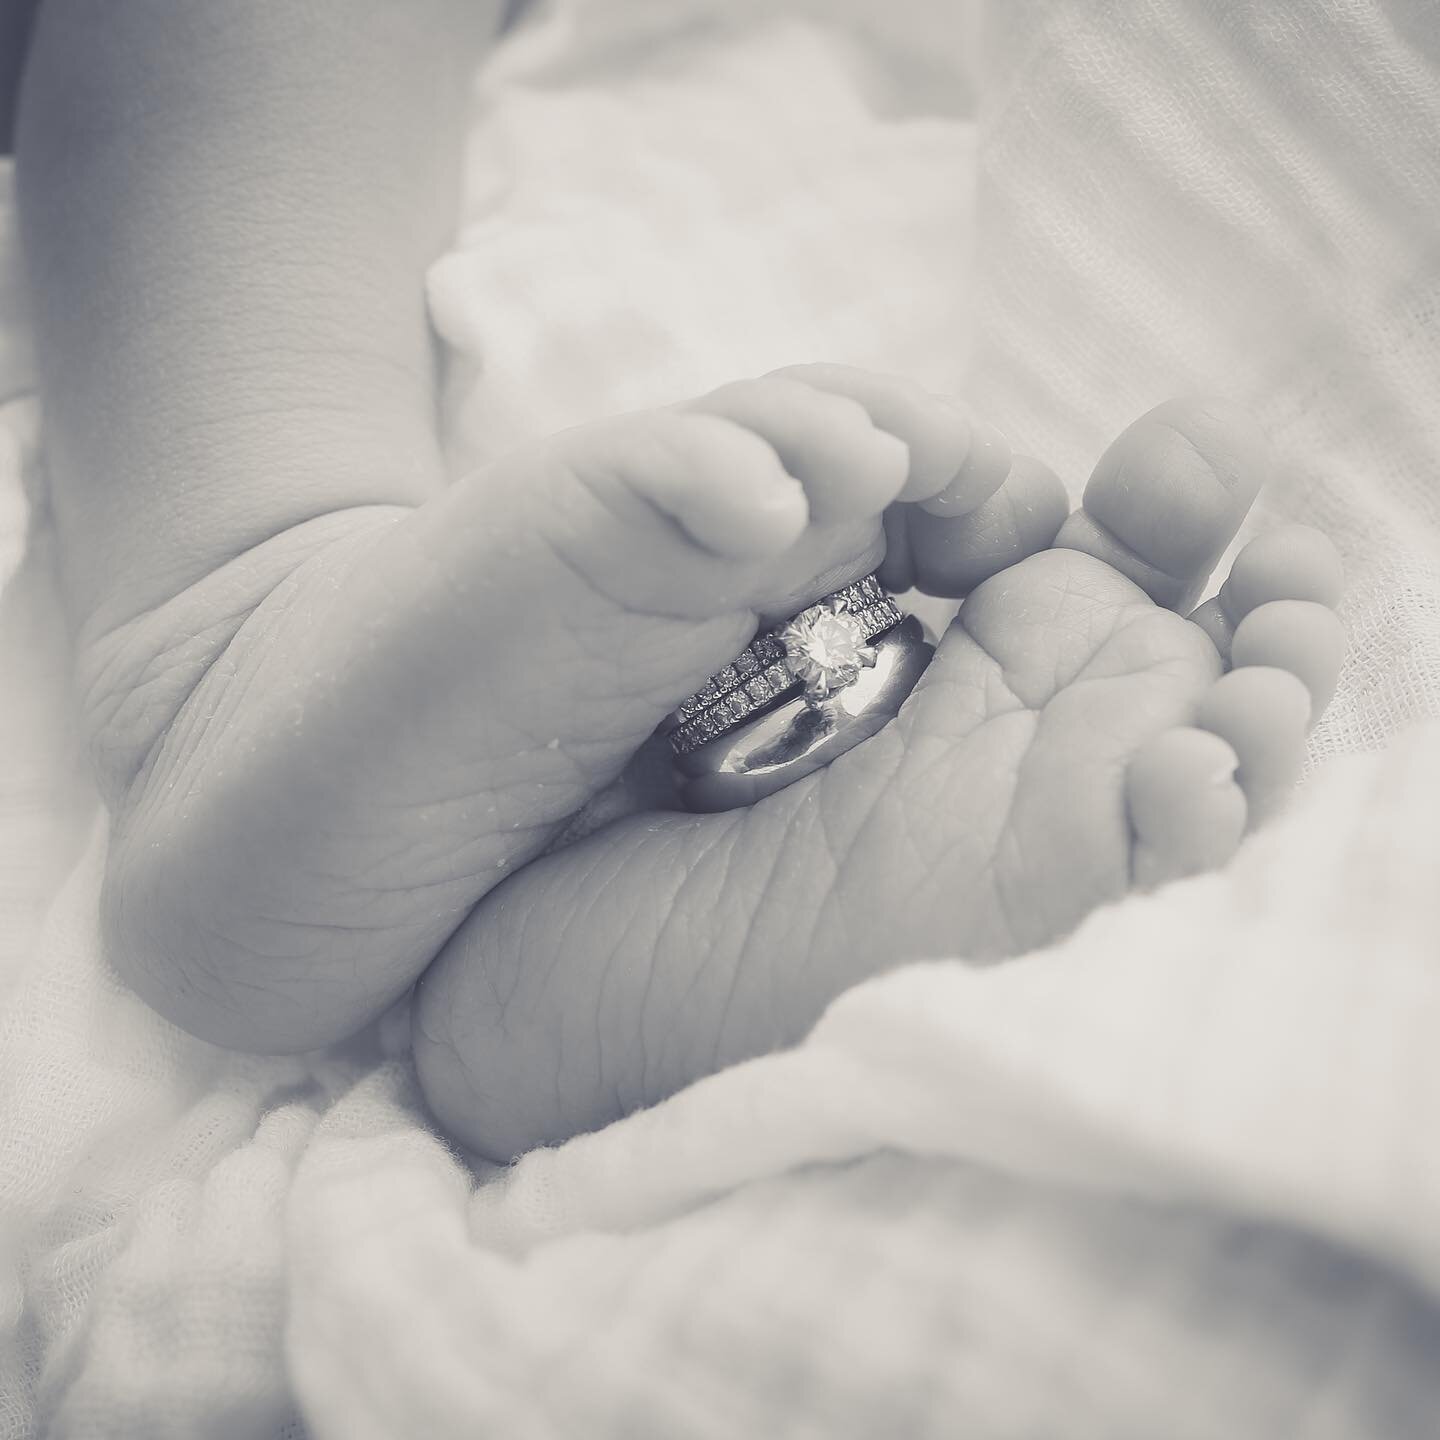 All the small things ❤️
.
.
We are loving detail shots at the moment! 
If you are thinking of messaging us to book a photography shoot in the studio we are currently taking bookings for June ☺️
.
.
#newbornbaby #newbornphotoshoot #newbornfeet #engage